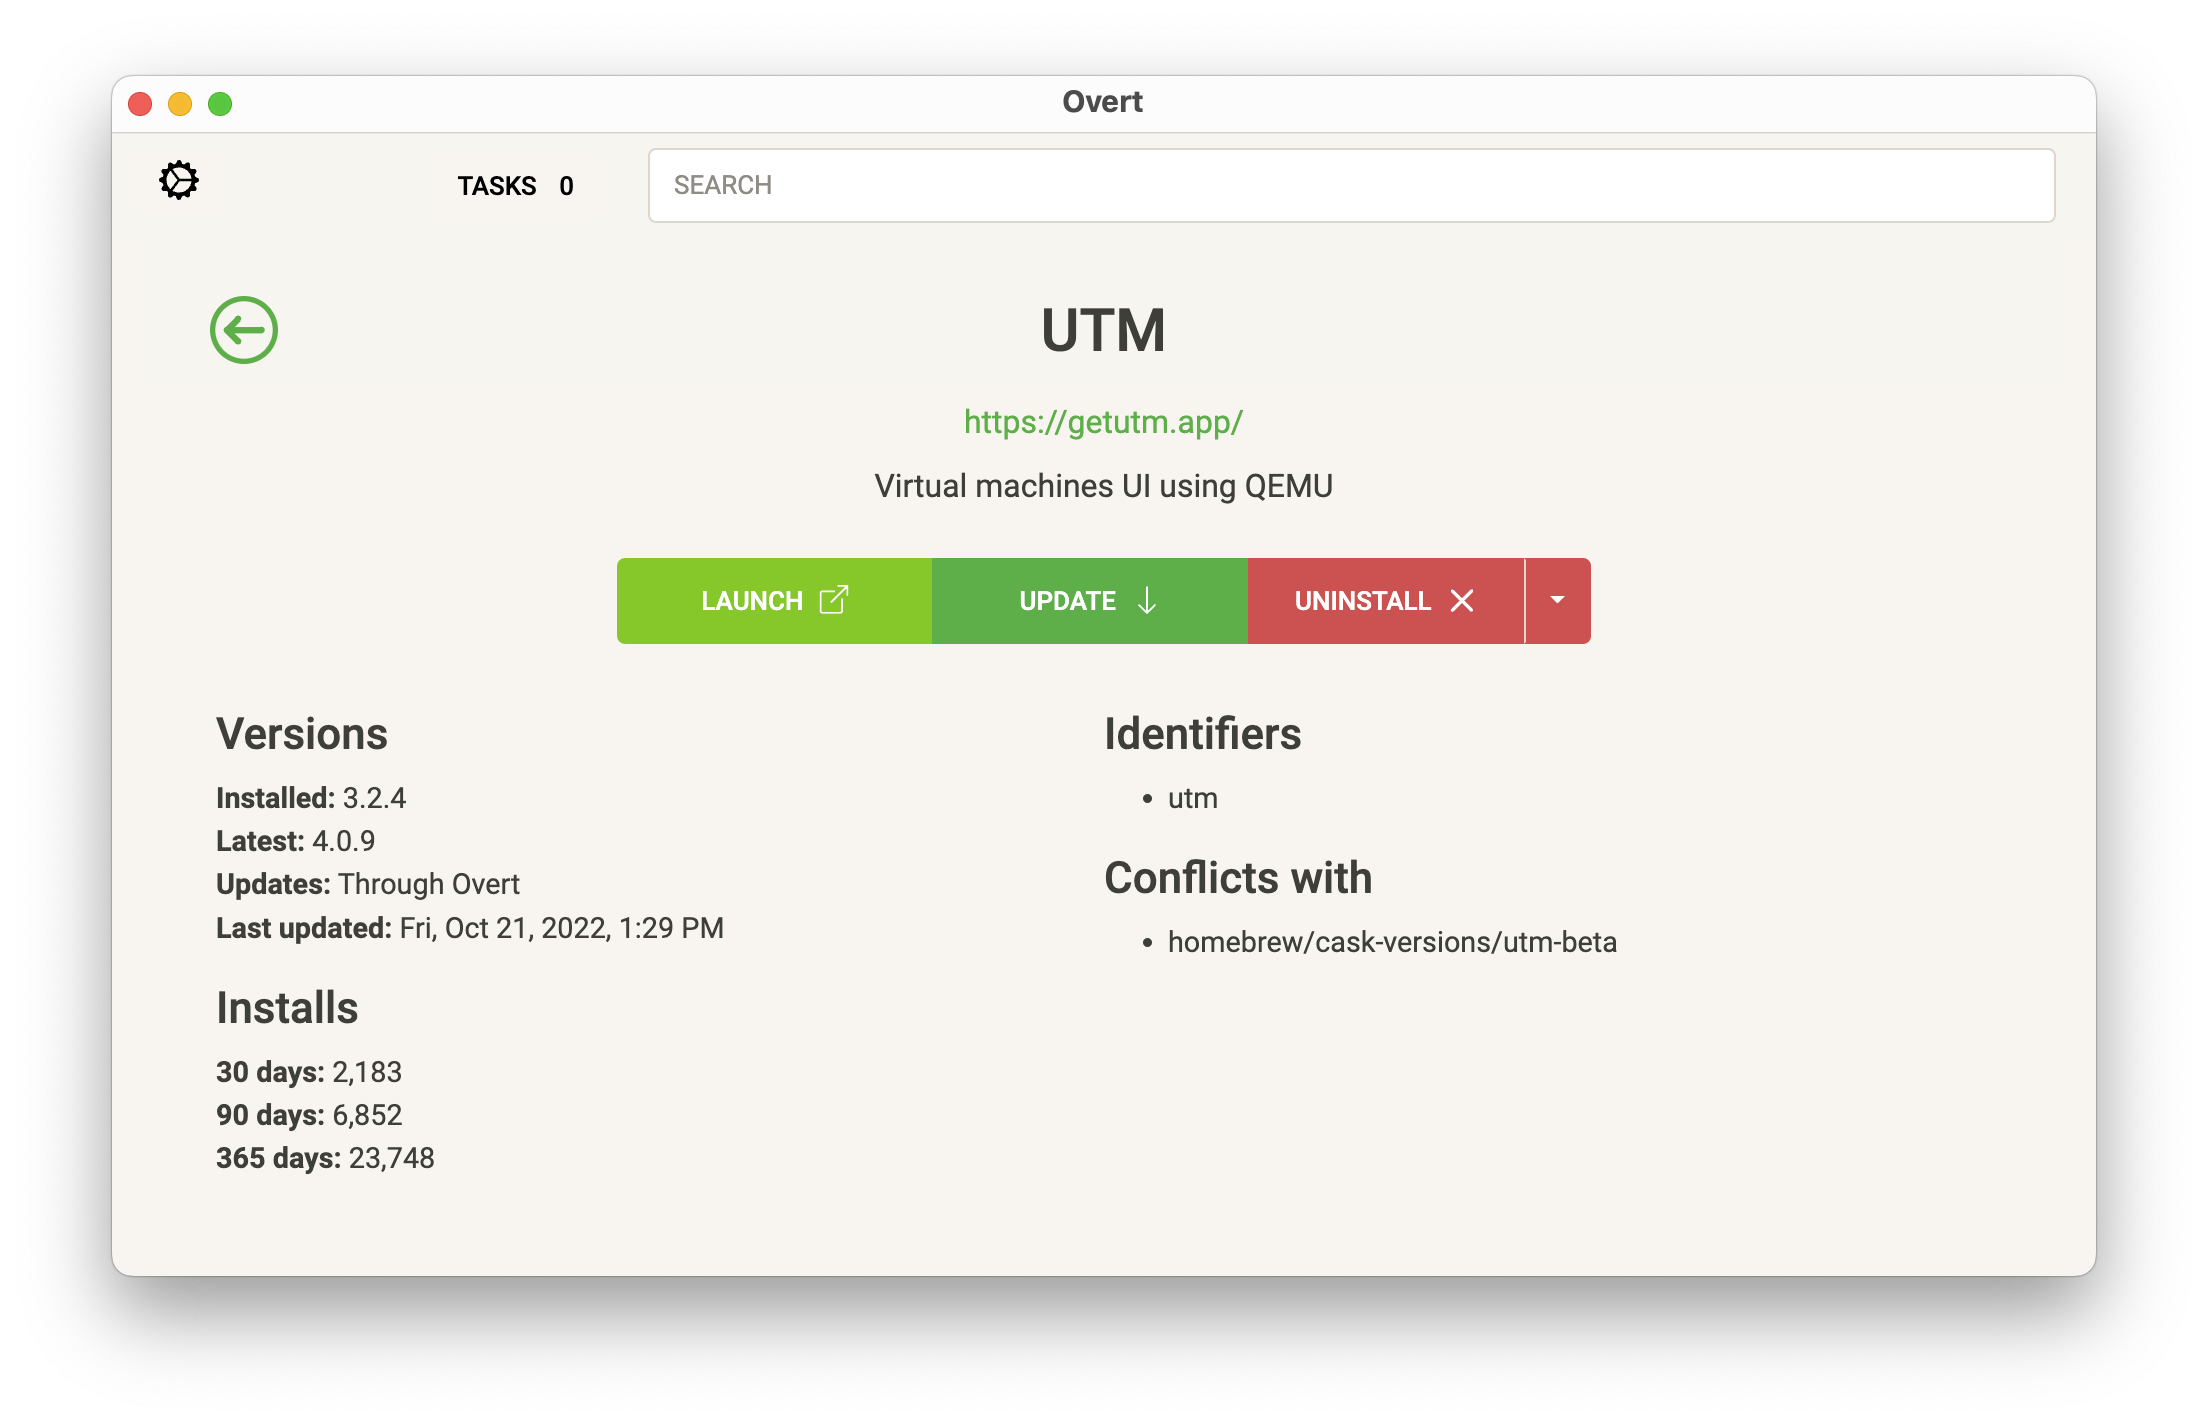 Viewing details for UTM, an installed app; action buttons read "Launch", "Update" and "Uninstall"